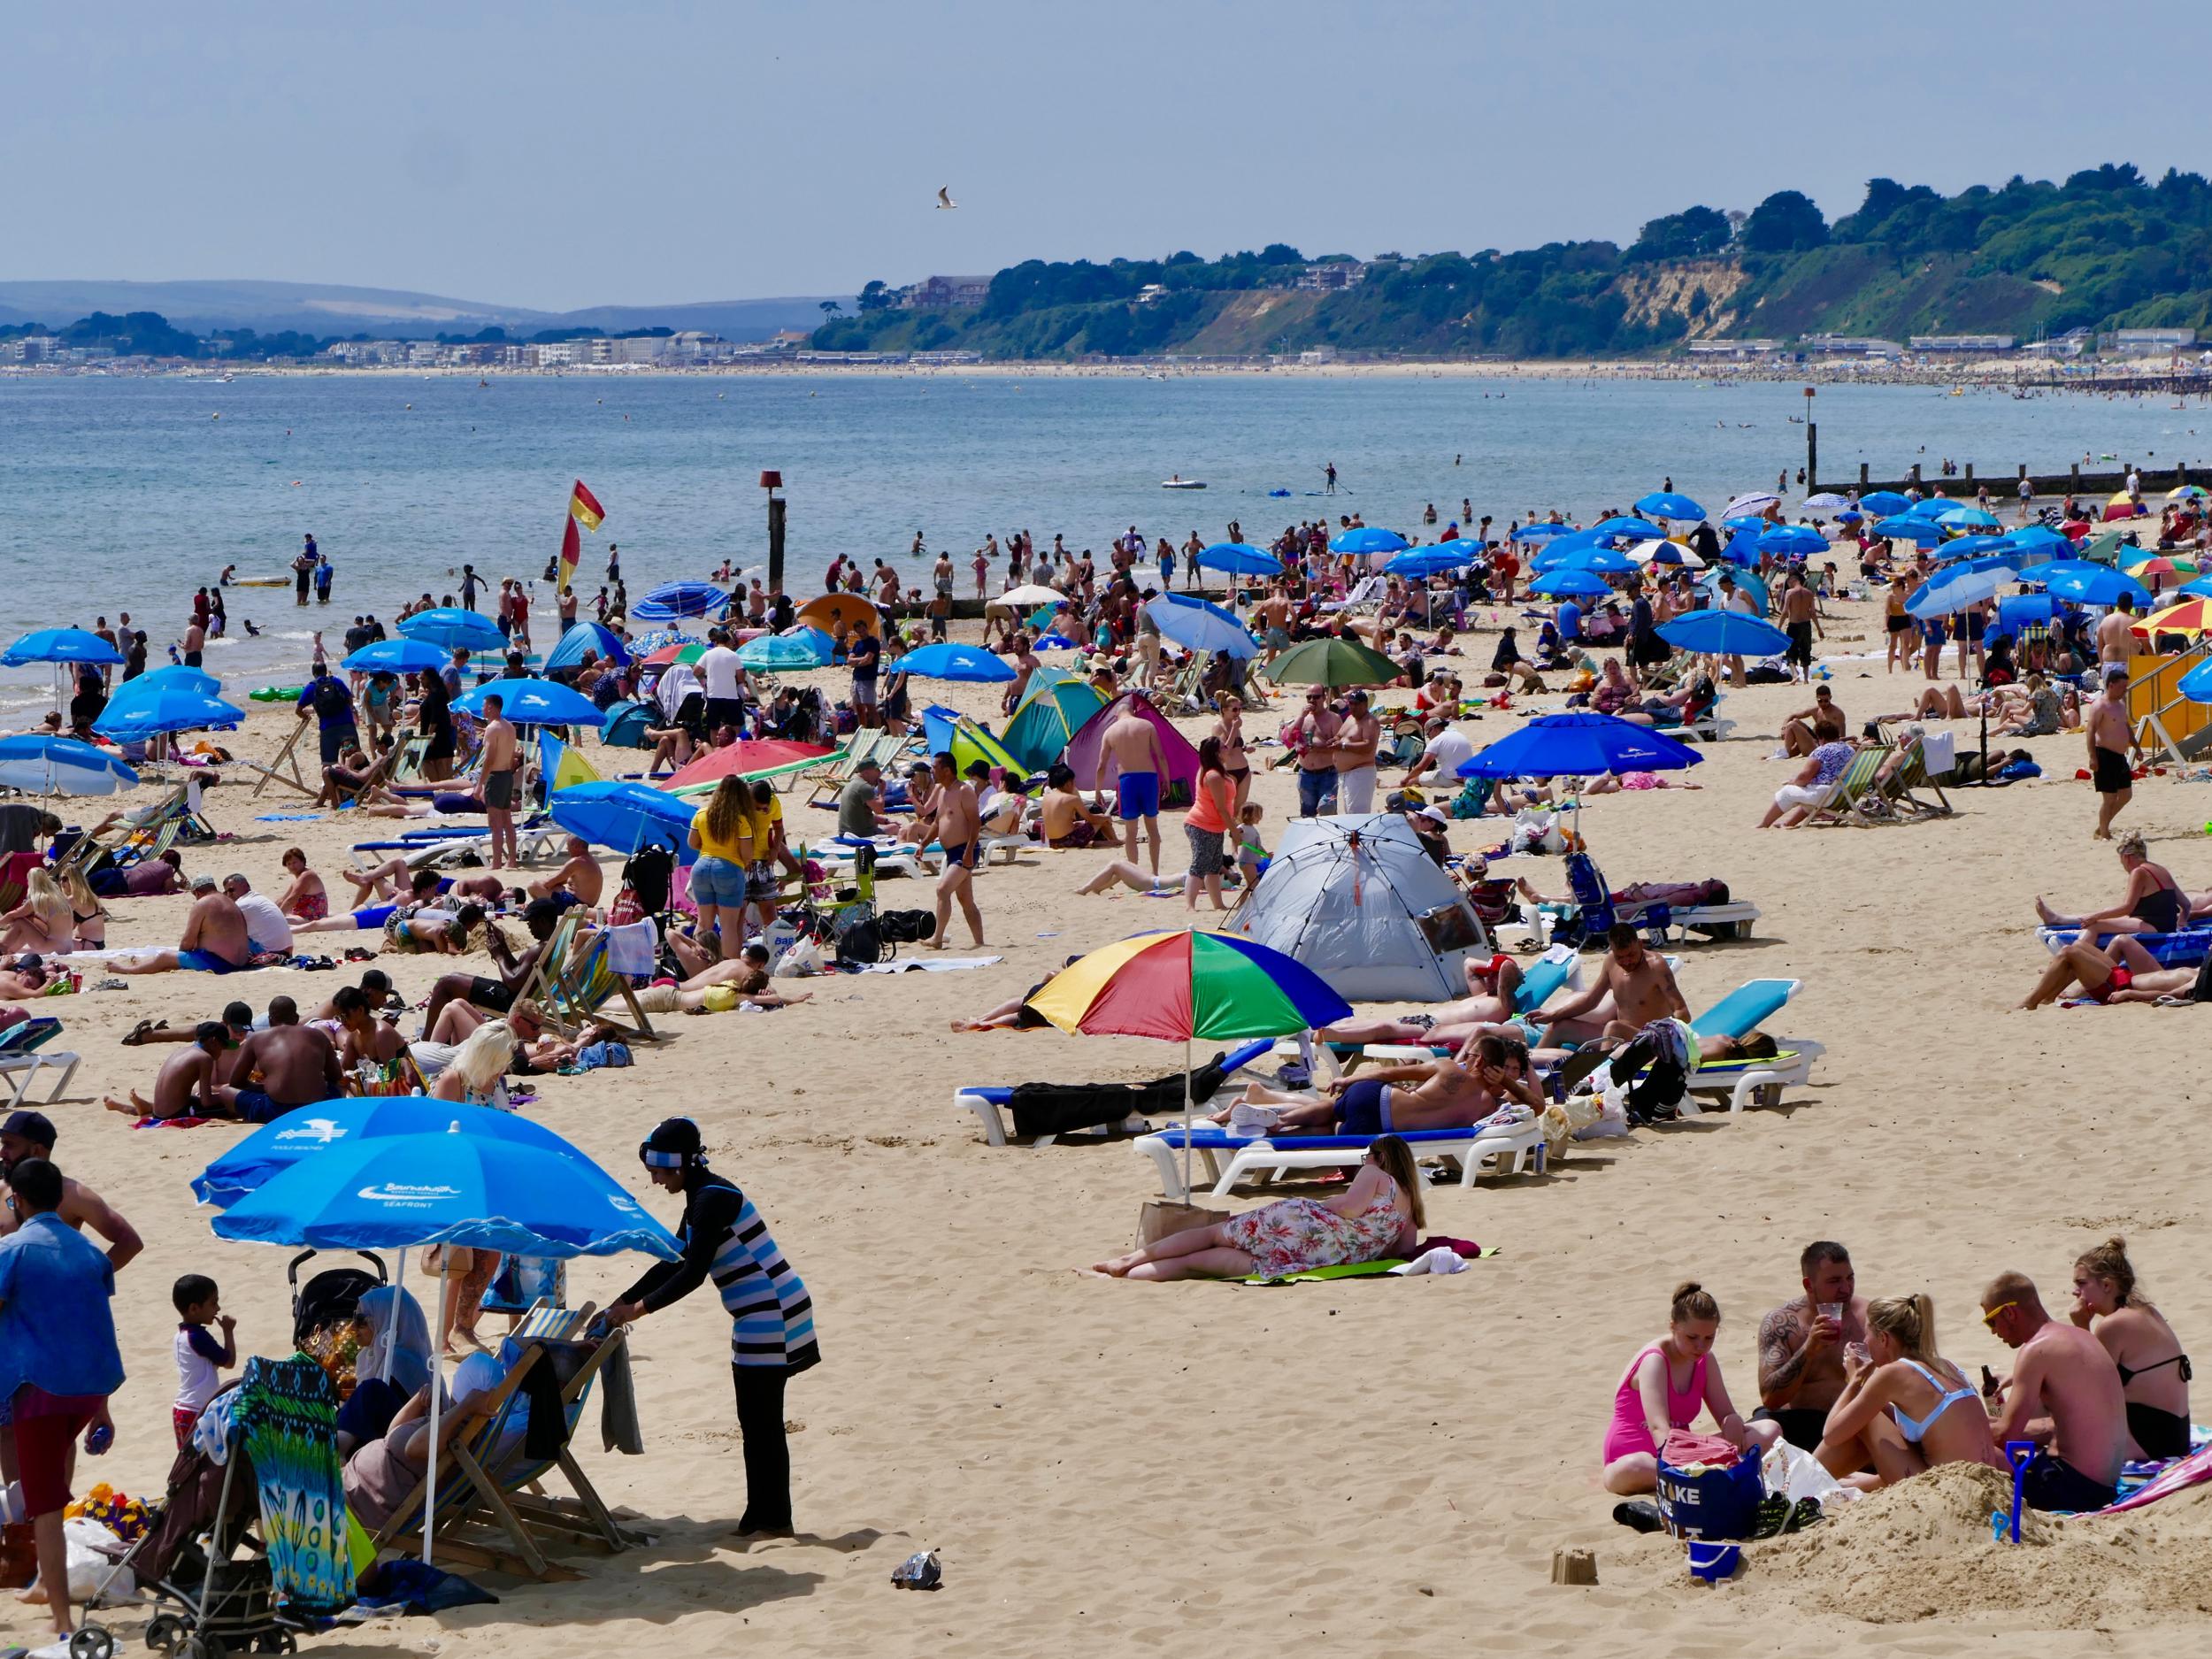 UK weather: Britain set for hottest week of year with temperatures forecast to soar past 30C